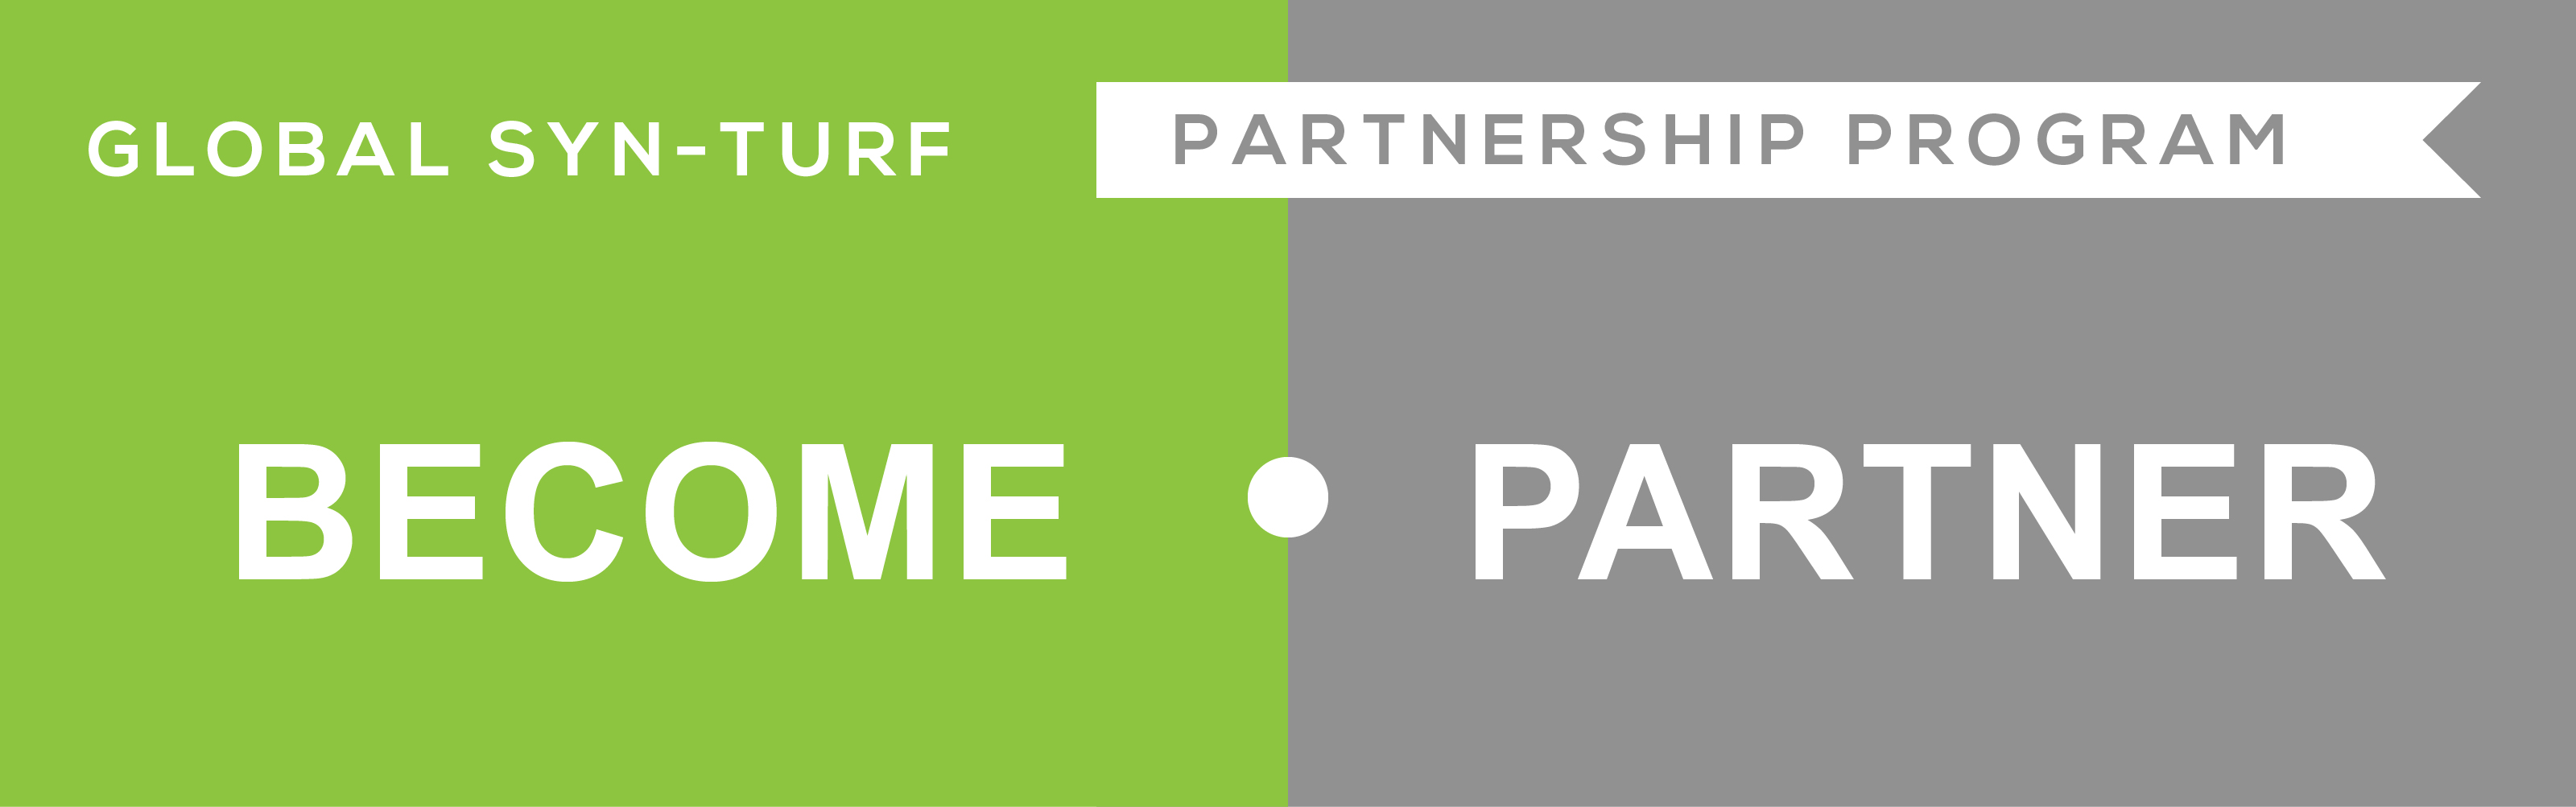 Become Partner - Global Syn-Turf